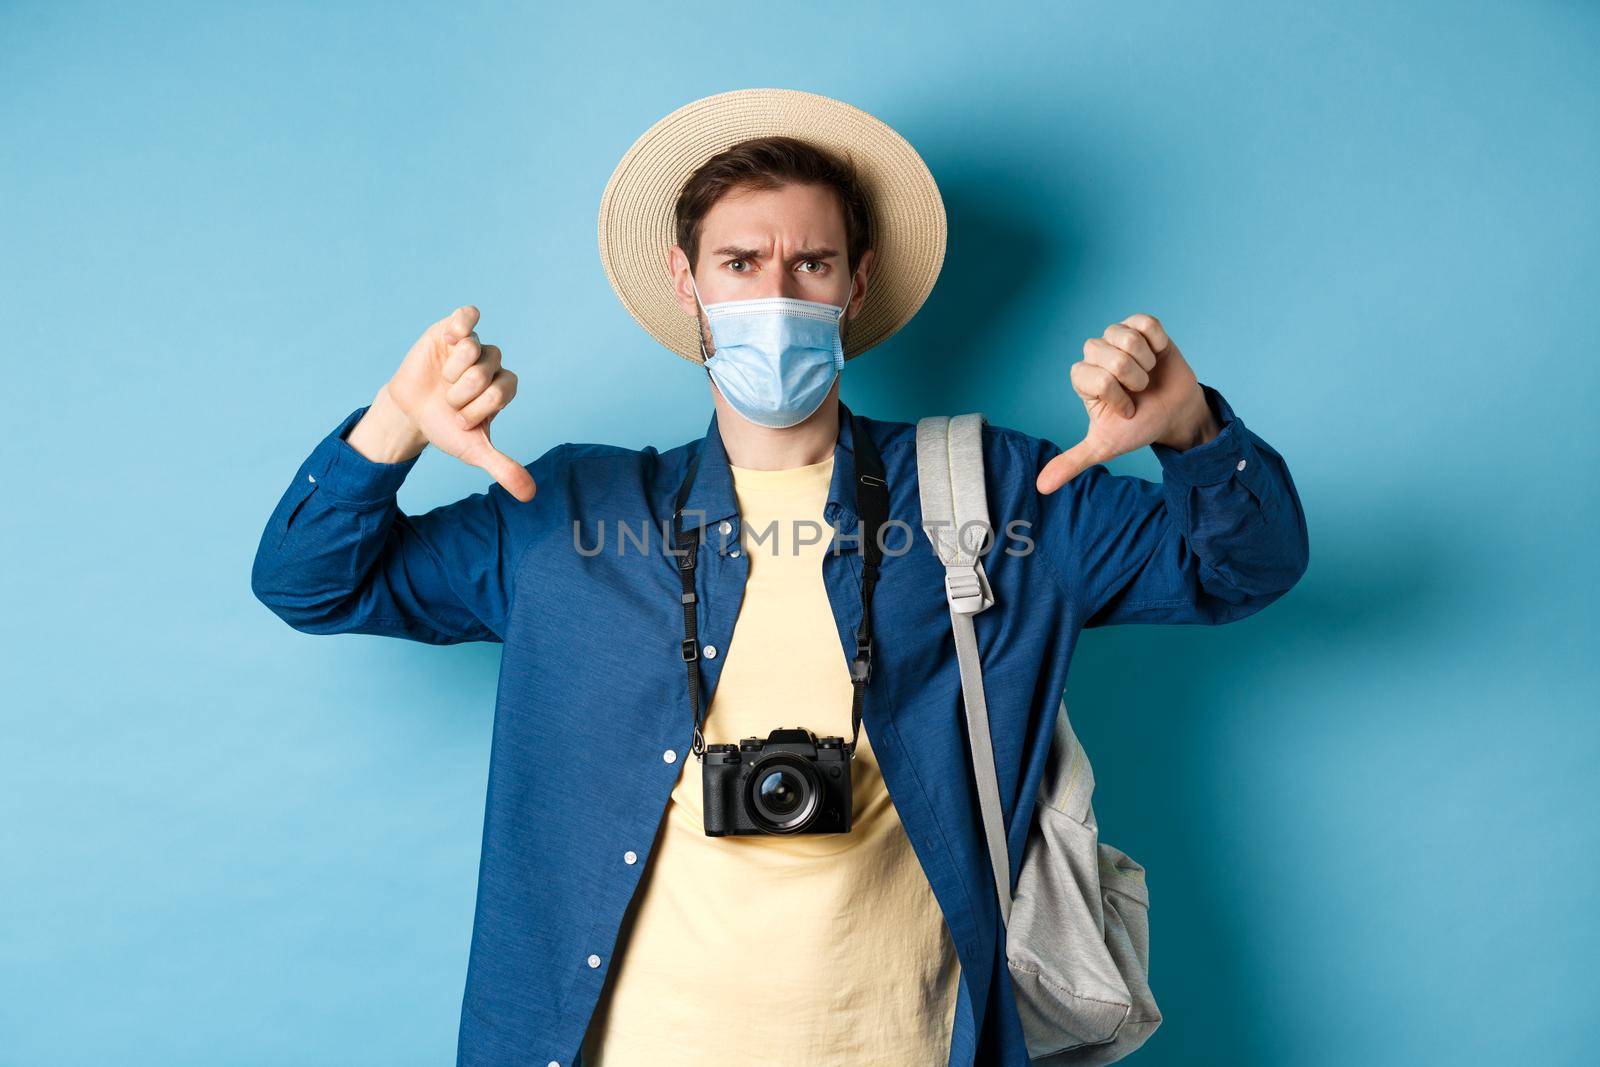 Covid-19 and summer holidays concept. Disappointed tourist in medicla mask frowning, showing thumbs down, negative feedback about travel, standing on blue background.